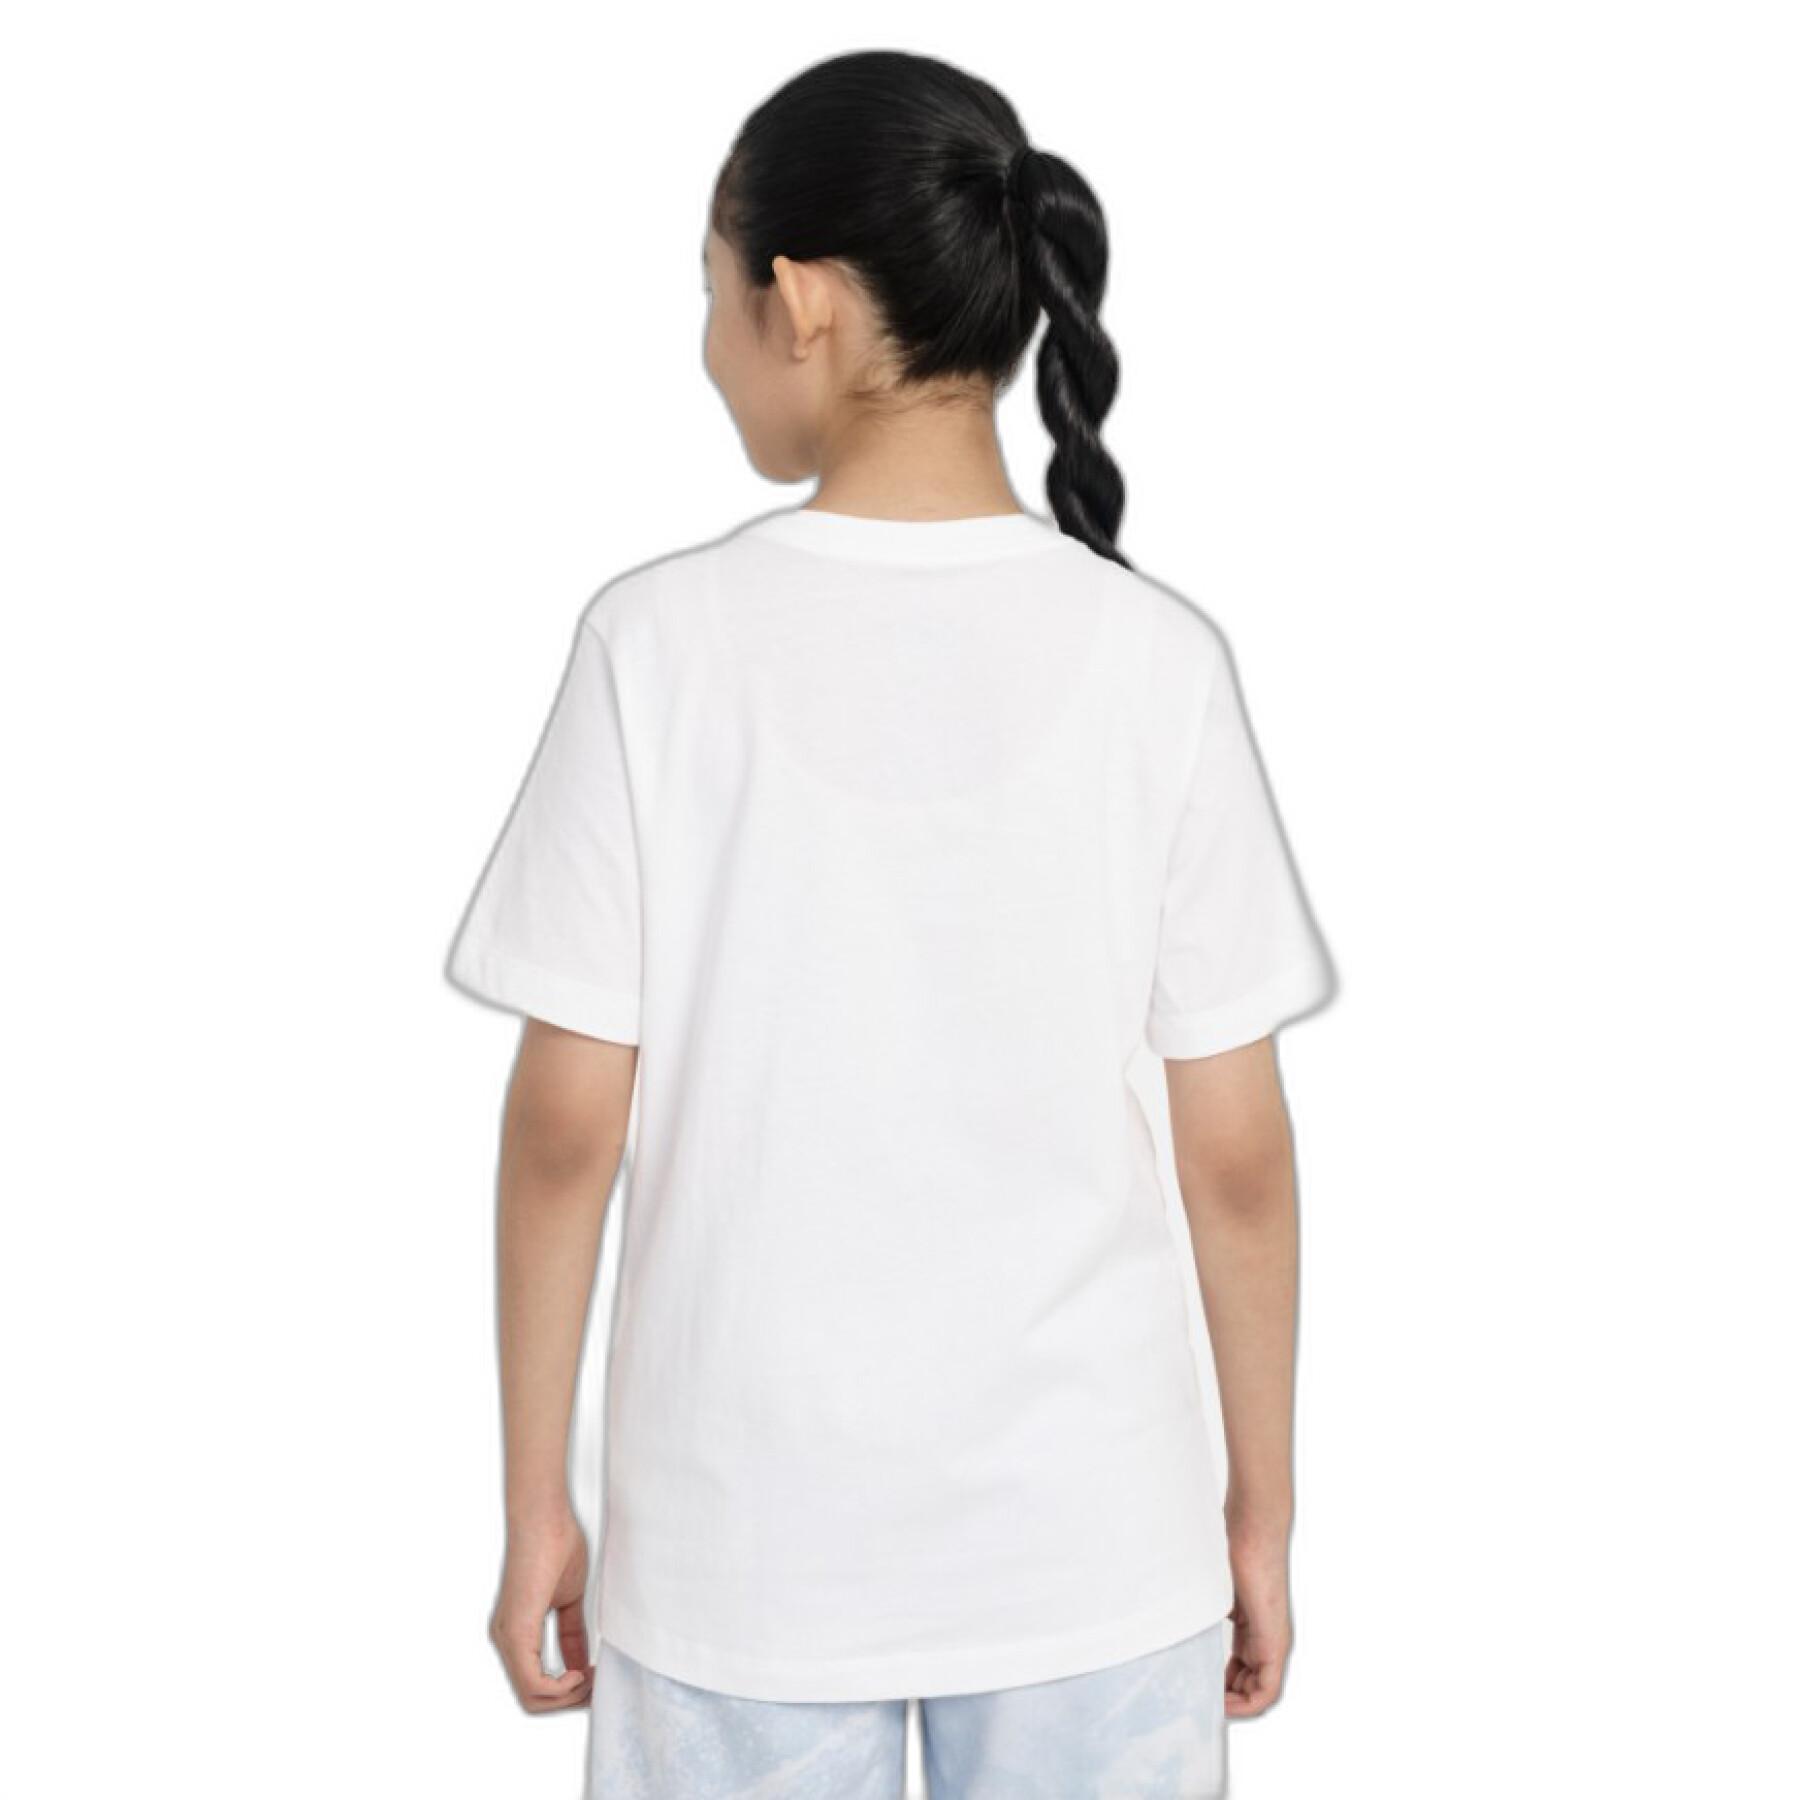 Kinder-T-shirt Nike By You